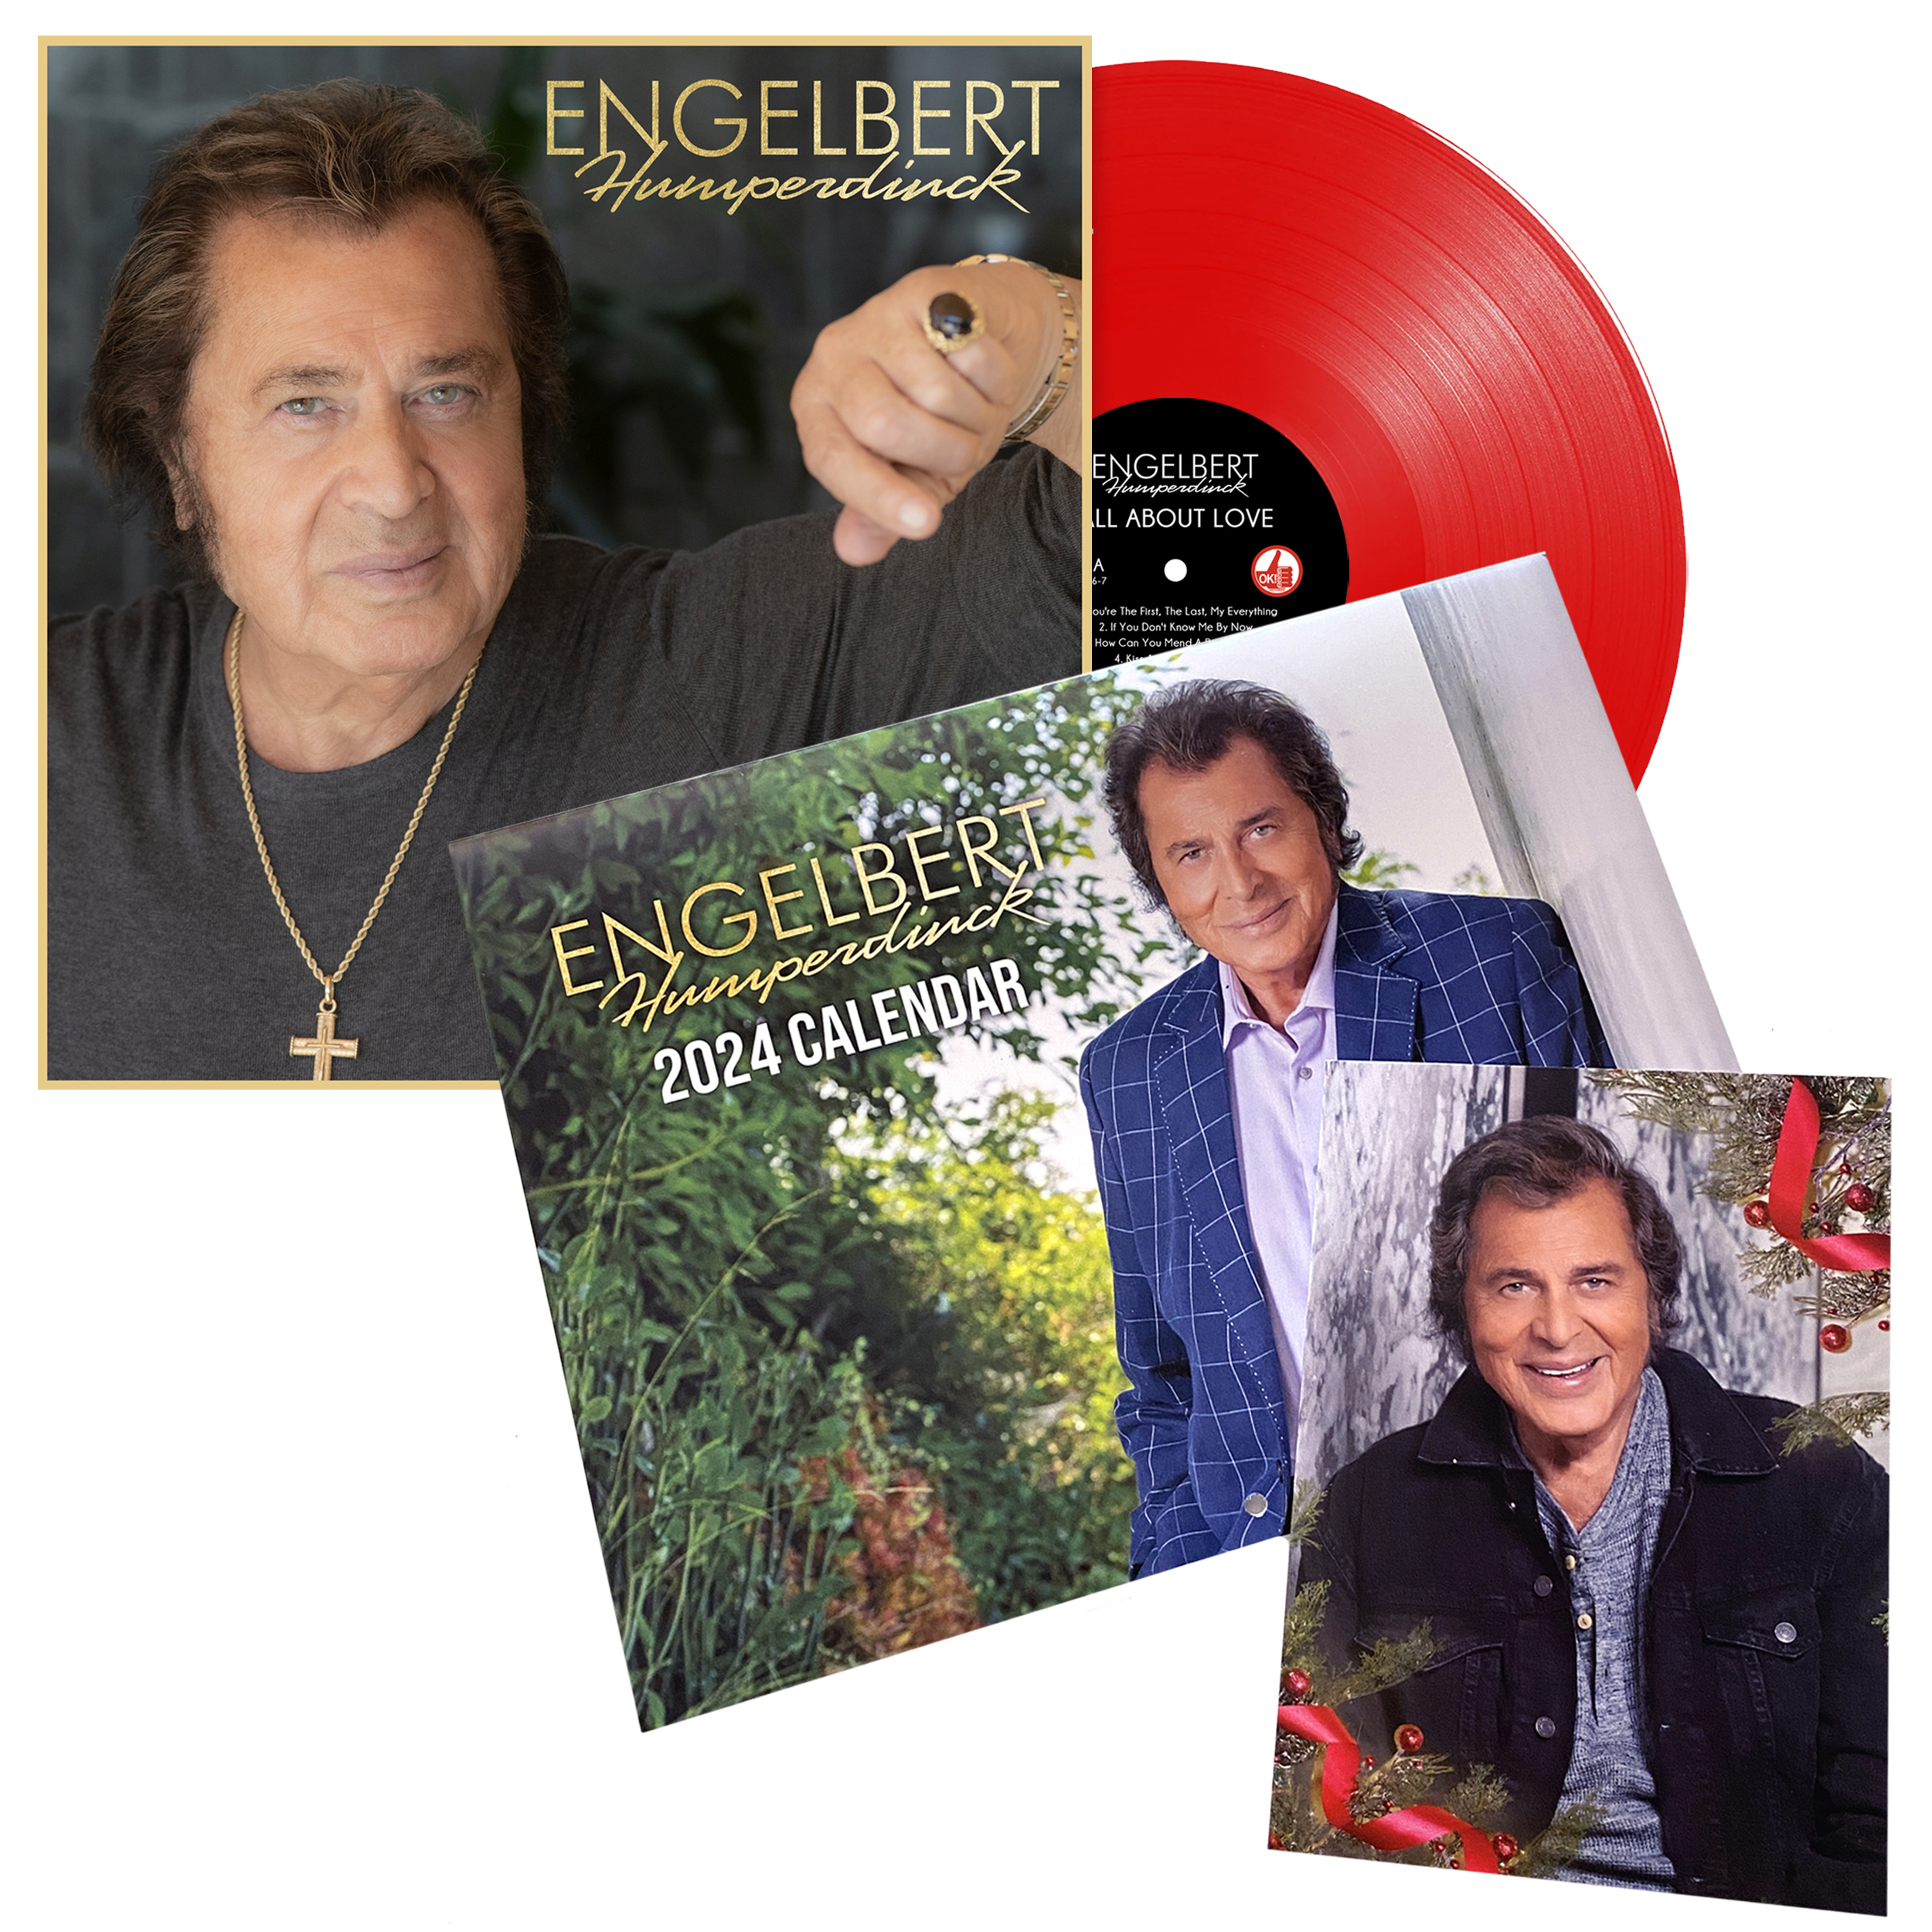 Engelbert Humperdinck 2024 Calendar Gift Sets Now Available! Featuring the Limited Edition "All About Love" Red Opaque Vinyl LP